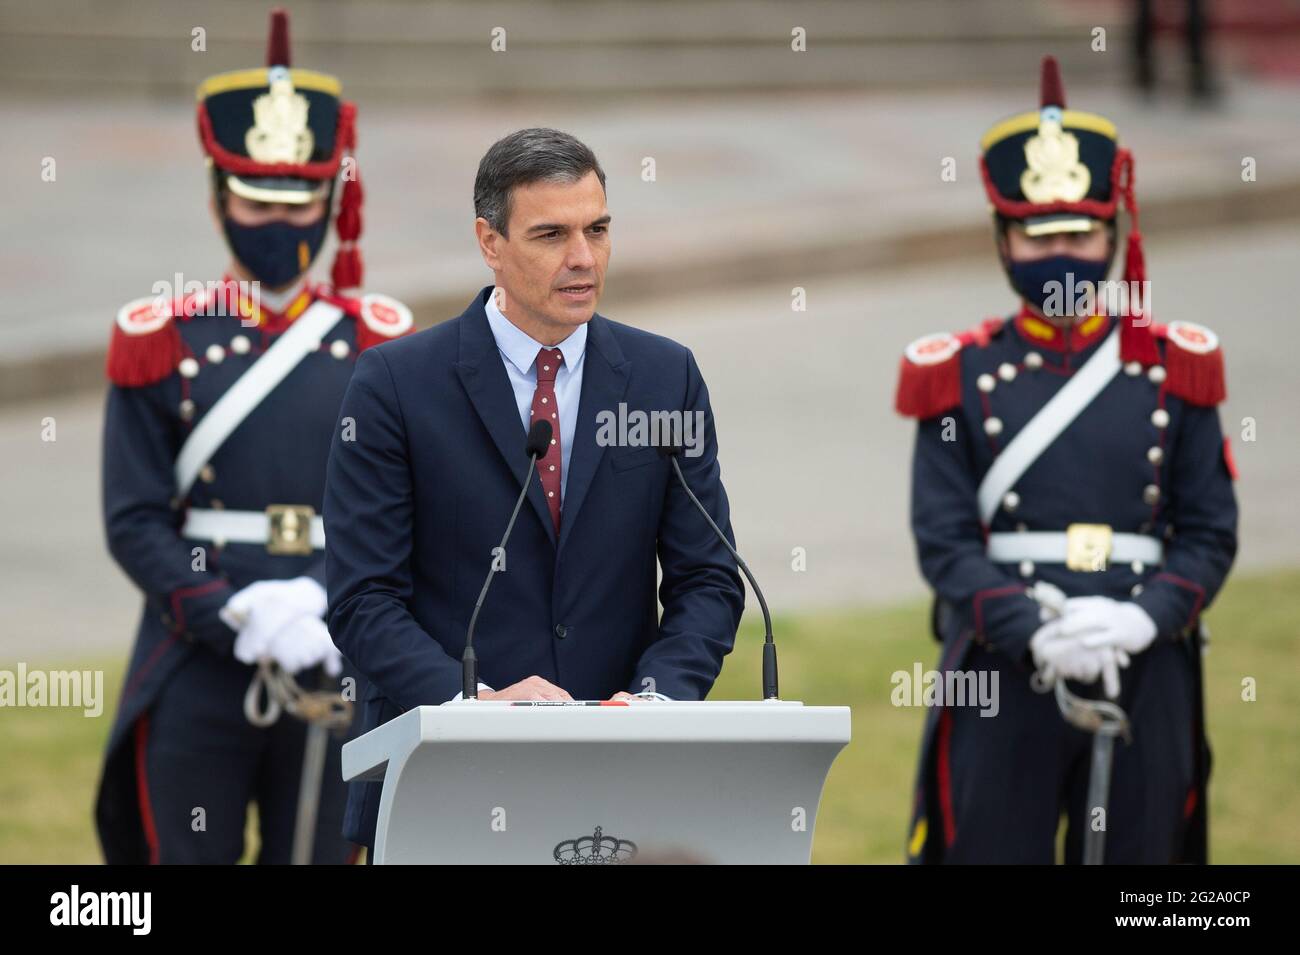 Prime Minister of Spain Pedro Sanchez speaks at a press conference after  his counterpart Alberto Fernandez from Argentina received him at the  Argentine Government House. After an extensive meeting, they held a